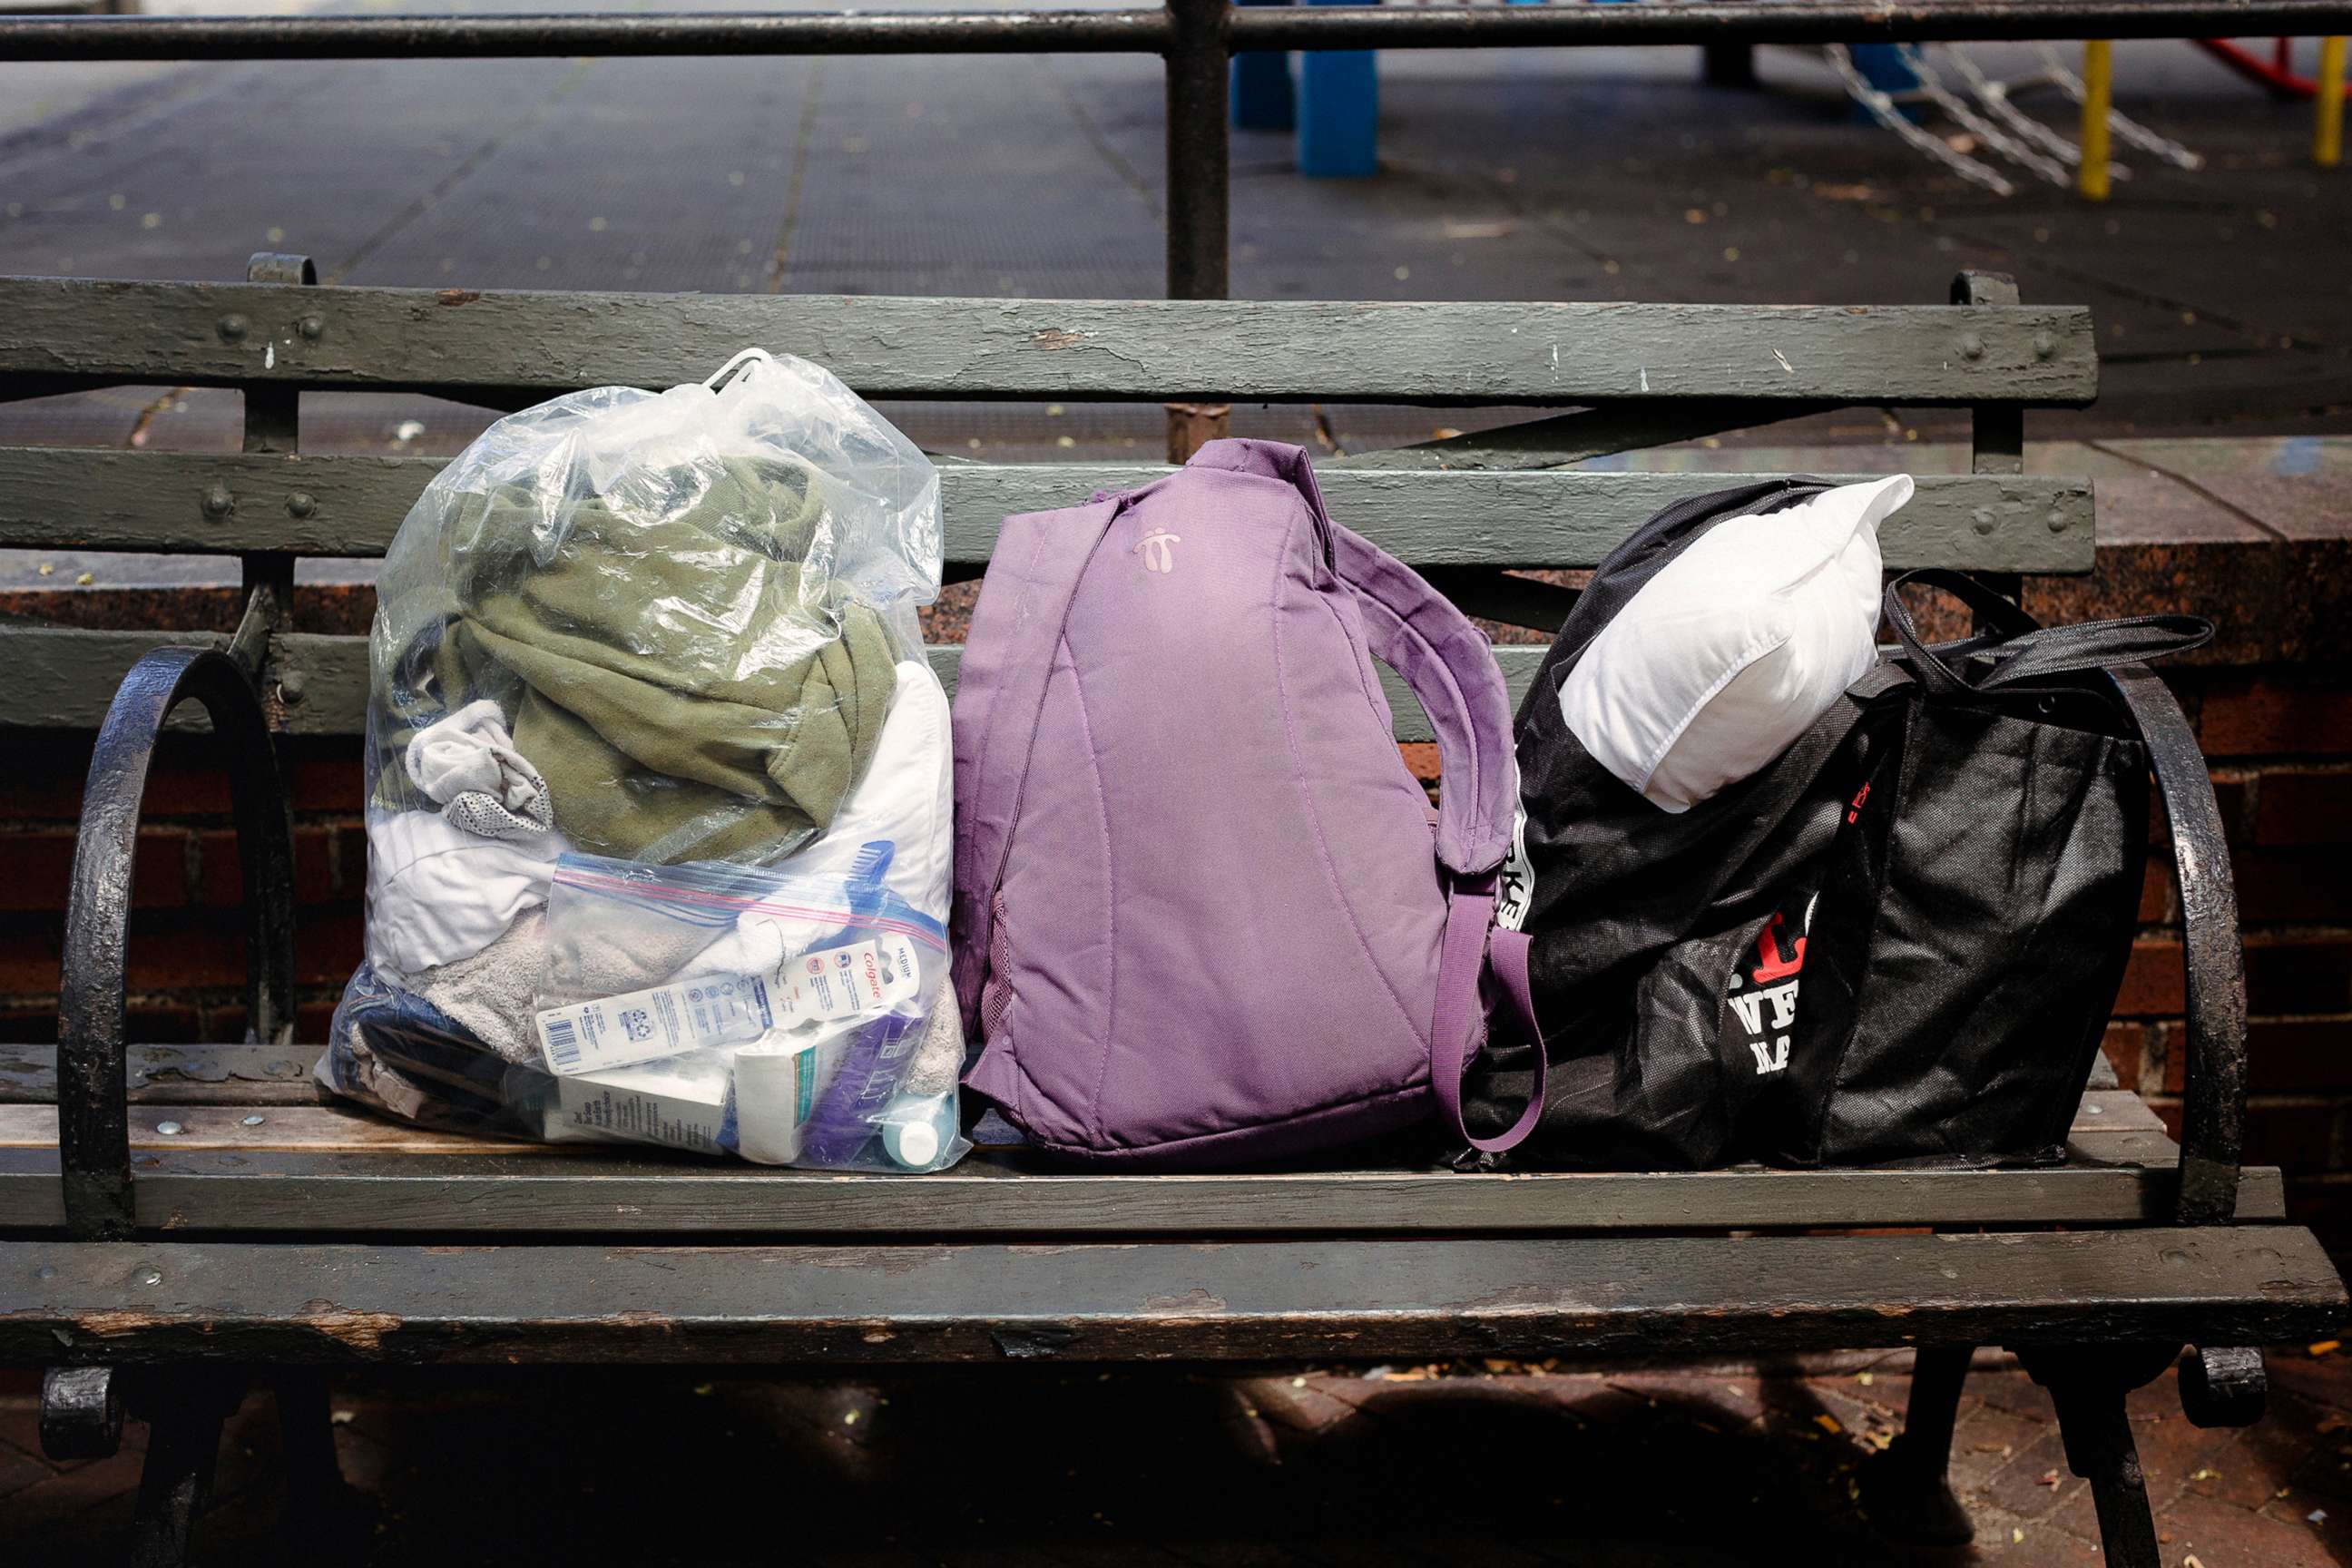 PHOTO: Possessions brought along for the last leg of the journey in New York on Aug. 5, 2022.